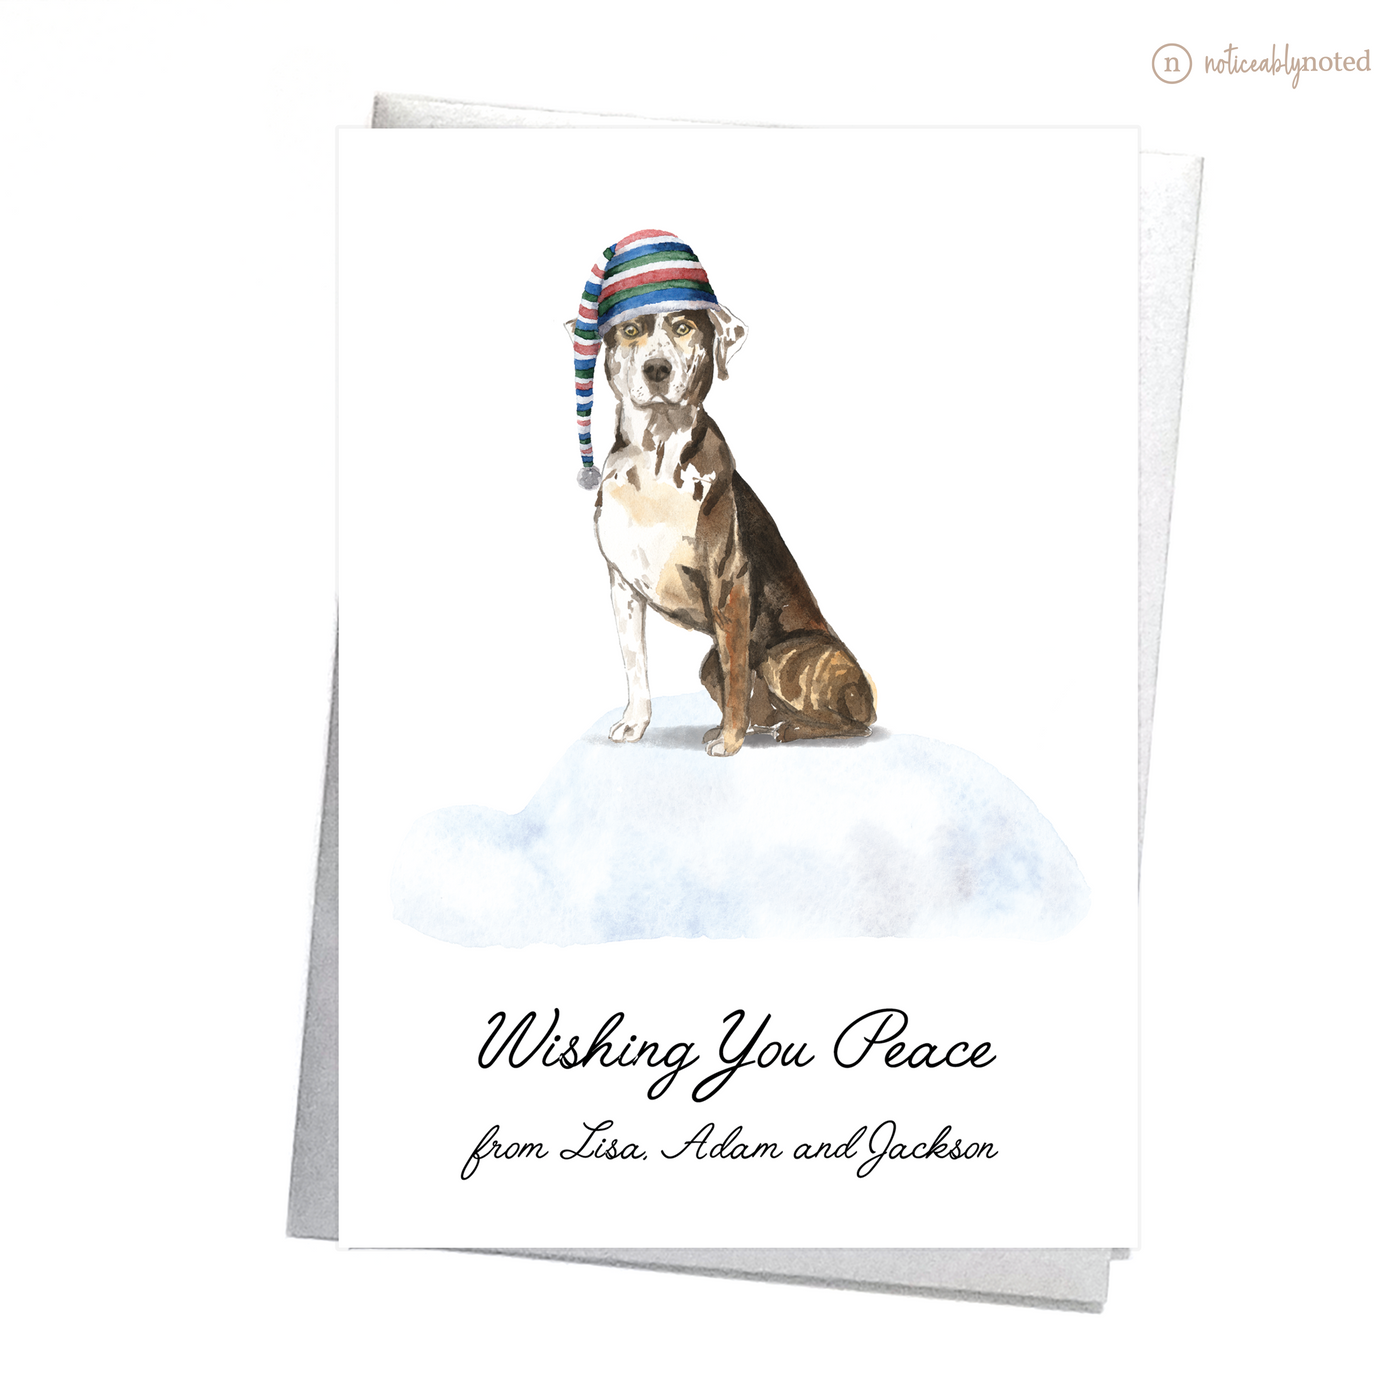 Catahoula Leopard Dog Christmas Card | Noticeably Noted